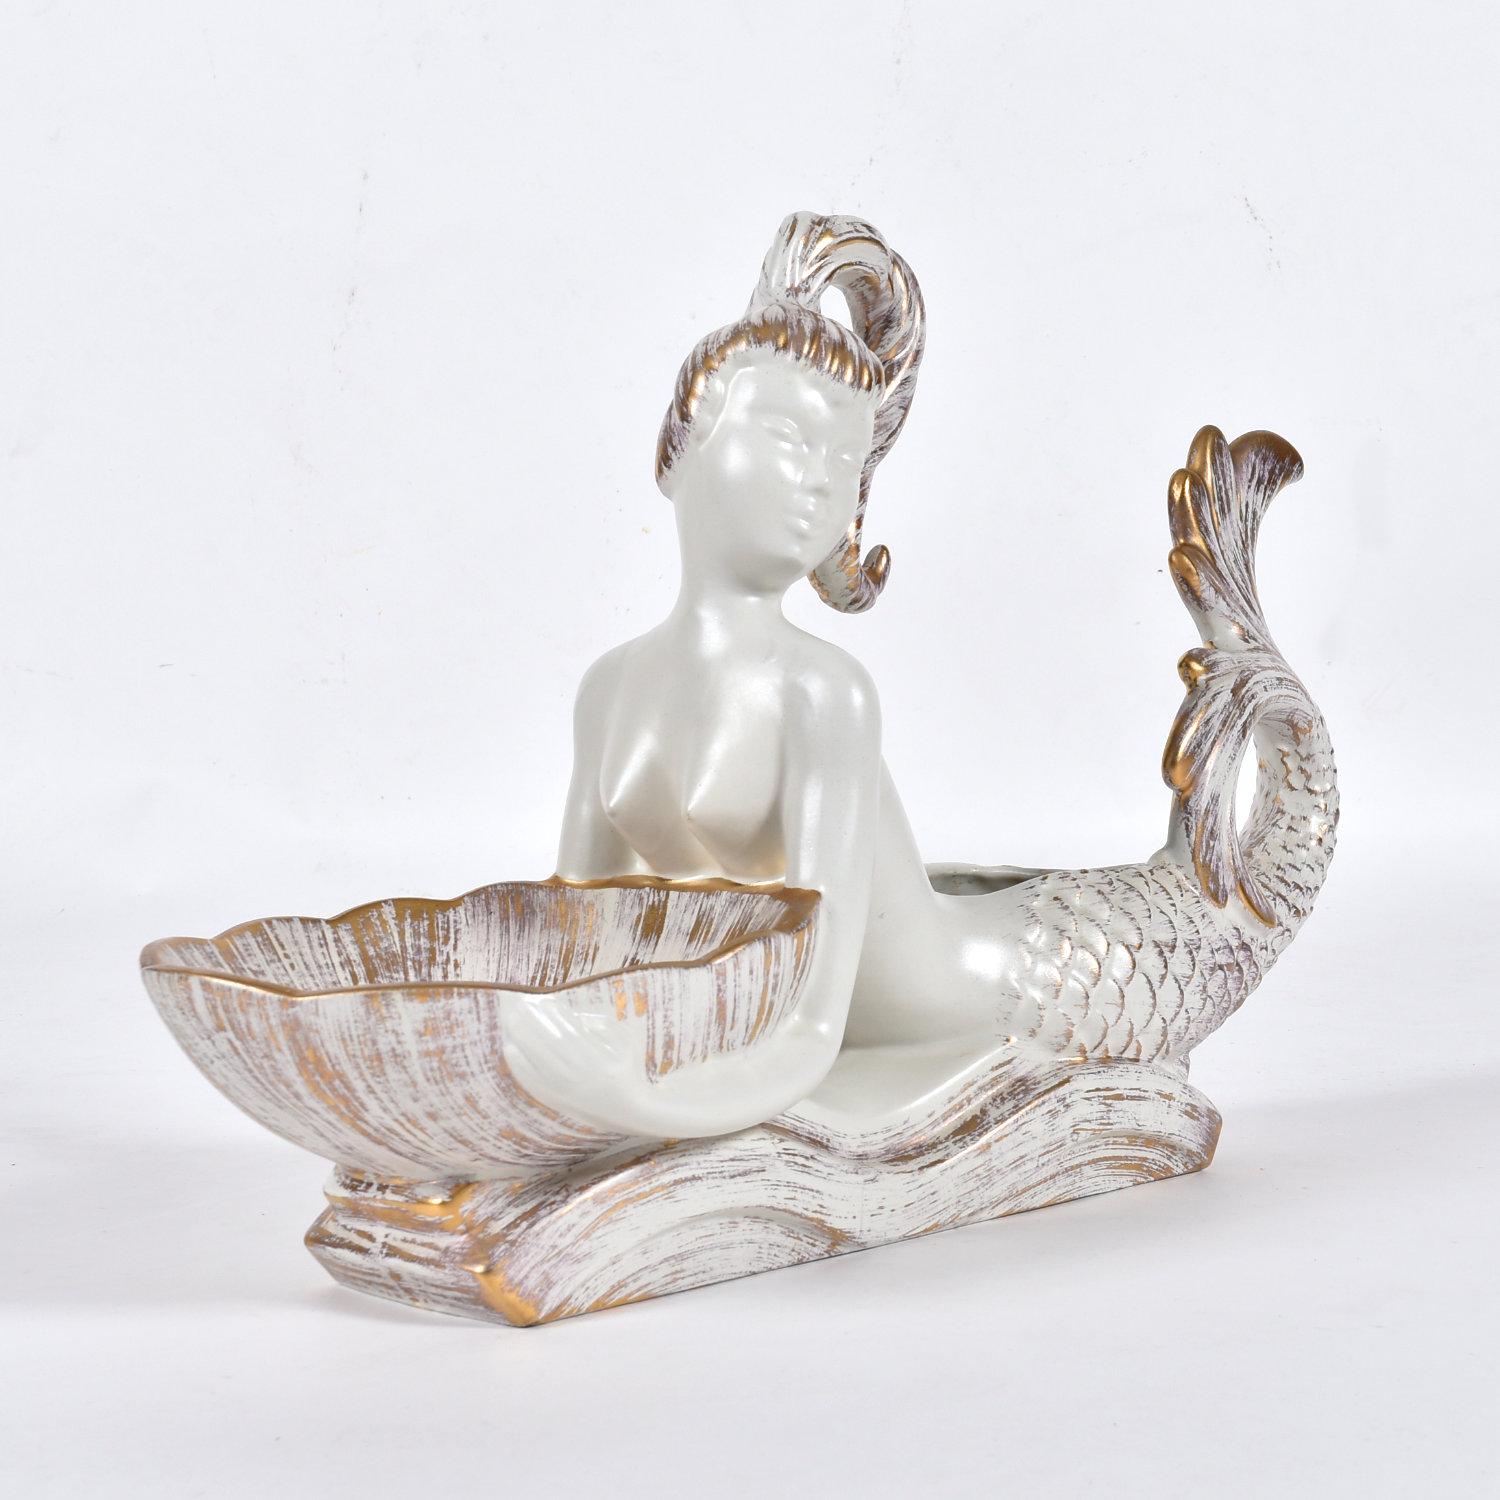 Mid-Century Modern Gold Tweed decorative ceramics set by Royal Haeger. This set includes a stunning 23? long mermaid planter. This gorgeous mermaid is white with 22k gold leaf accents. She is lying on her belly, holding a bowl that can be used as a